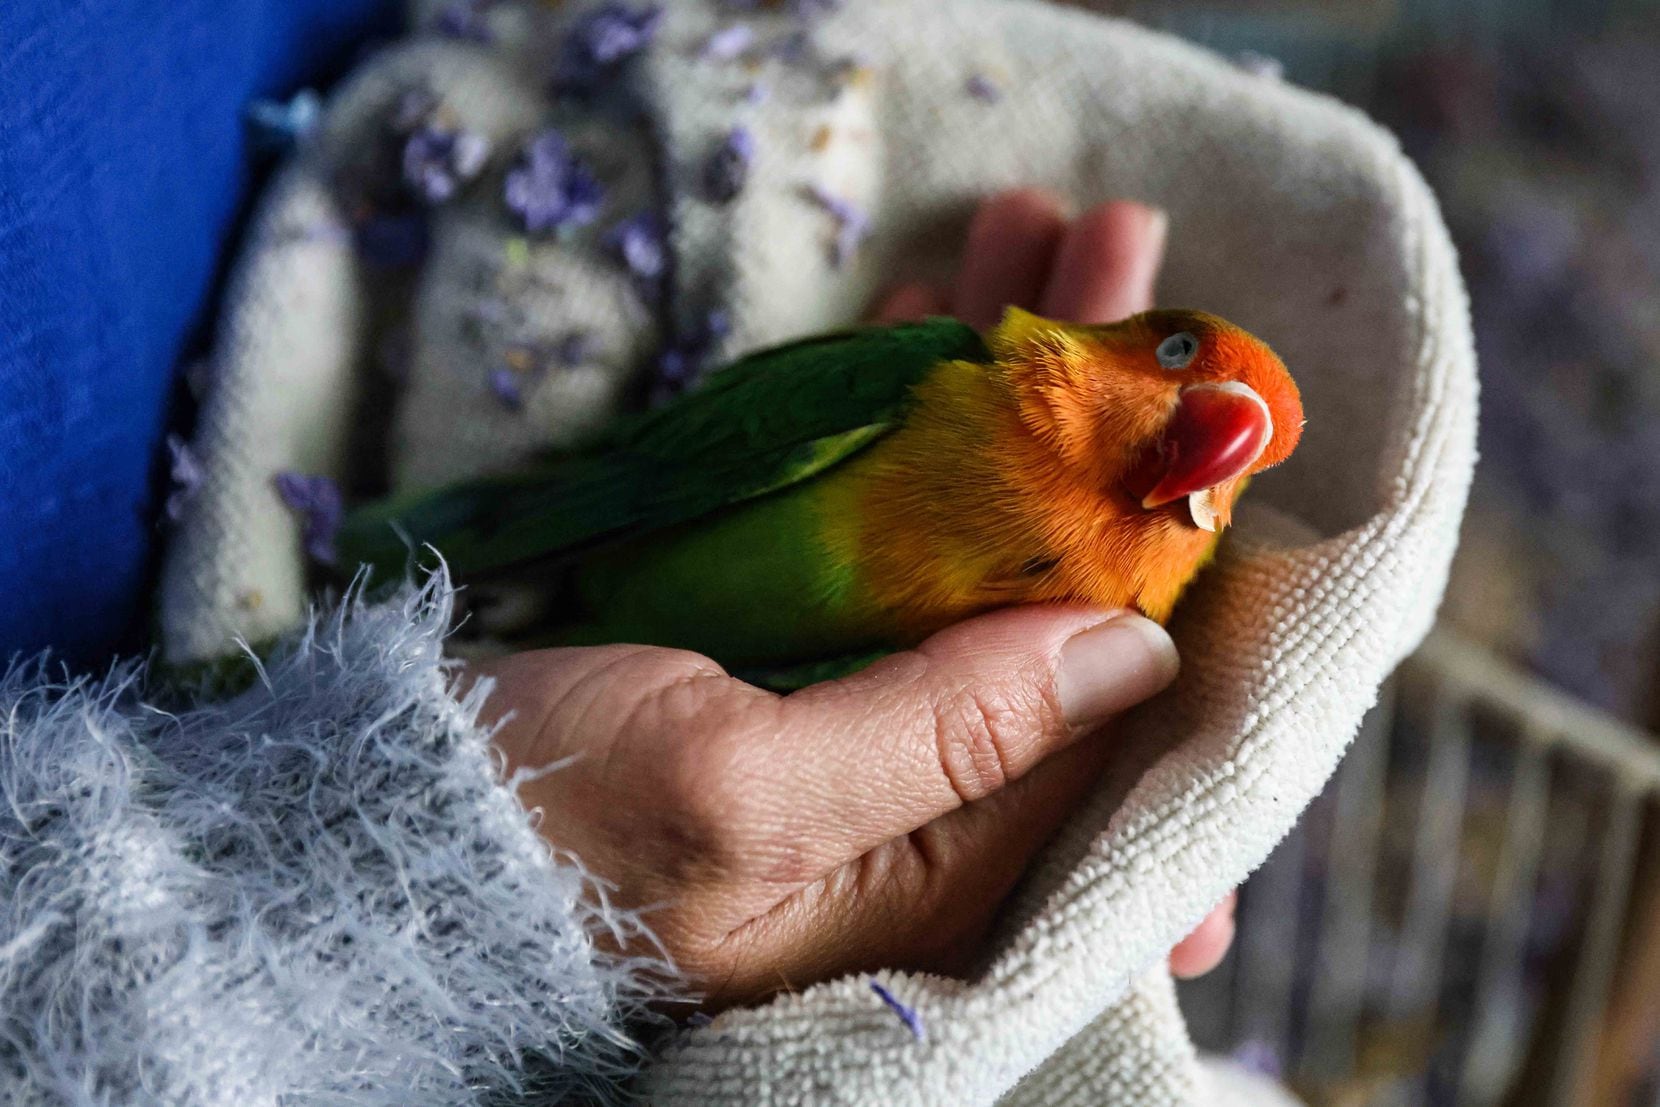 Marleny Almendarez, 38, cupped Little Rainbow, her pet parakeet, in her hand after the bird froze to death during power outages at her Dallas home. On Feb. 18, Almendarez and her two children spent the night in a bus that the city provided as a warming center. 